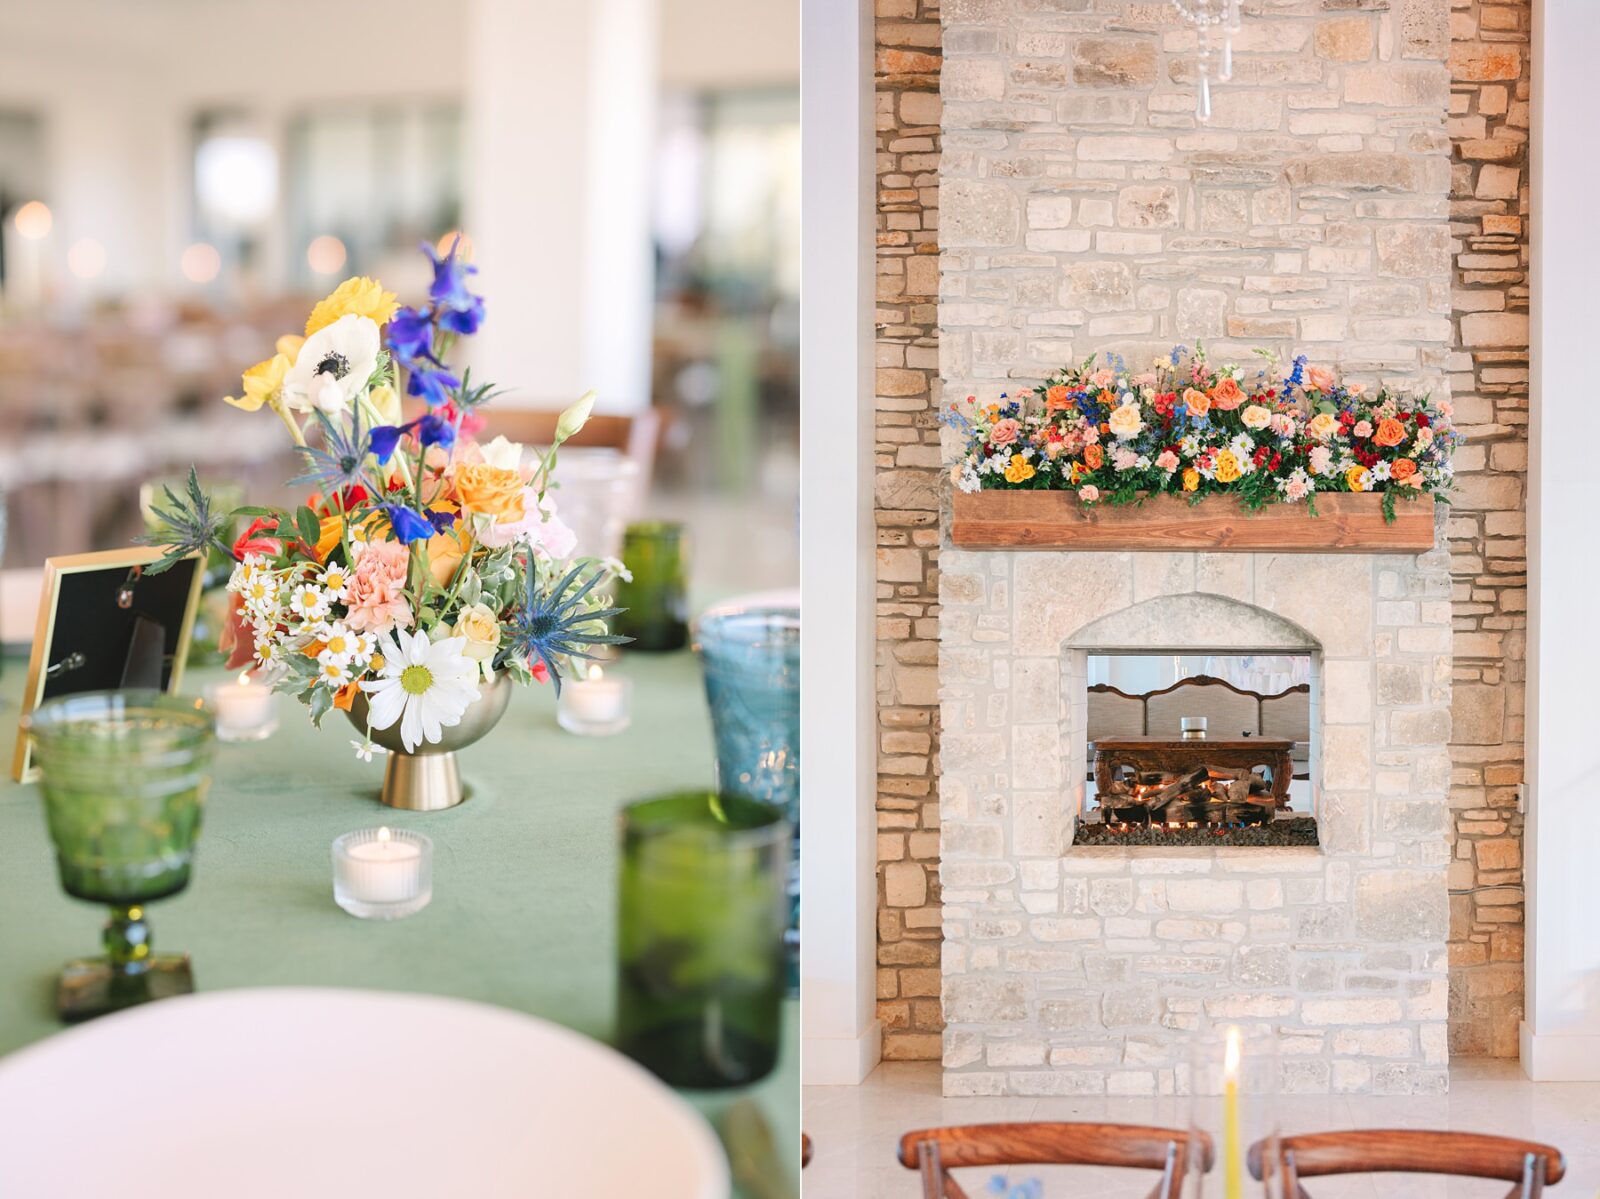 videre estate fireplace, green wedding decor, decorative cups at wedding, videre estate reception space, wedding at the videre estate venue, wimberley, photos by Tara Lyons Photography, Perry's Petal, planning by sweet magnolia events